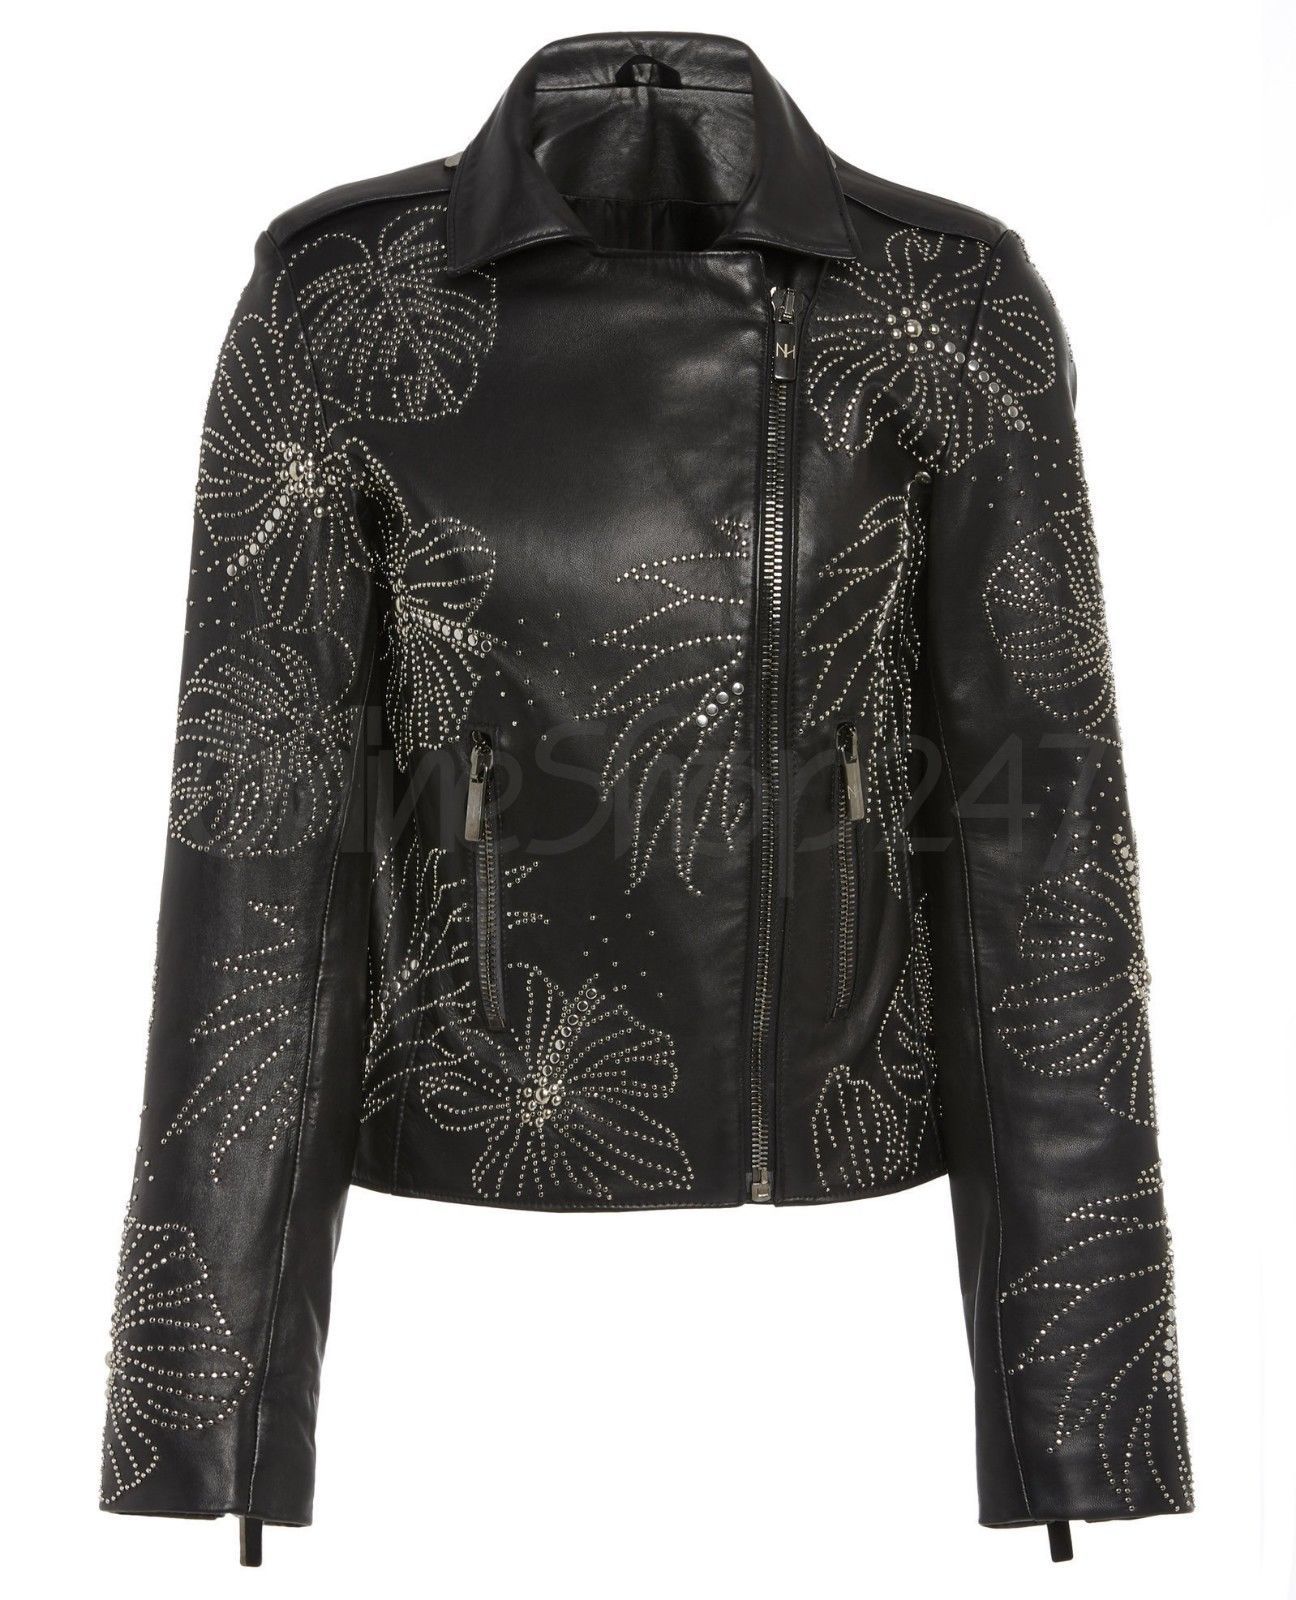 Primary image for New Women Black Full Flower Unique Designed Silver Studded Zipper Leather Jacket